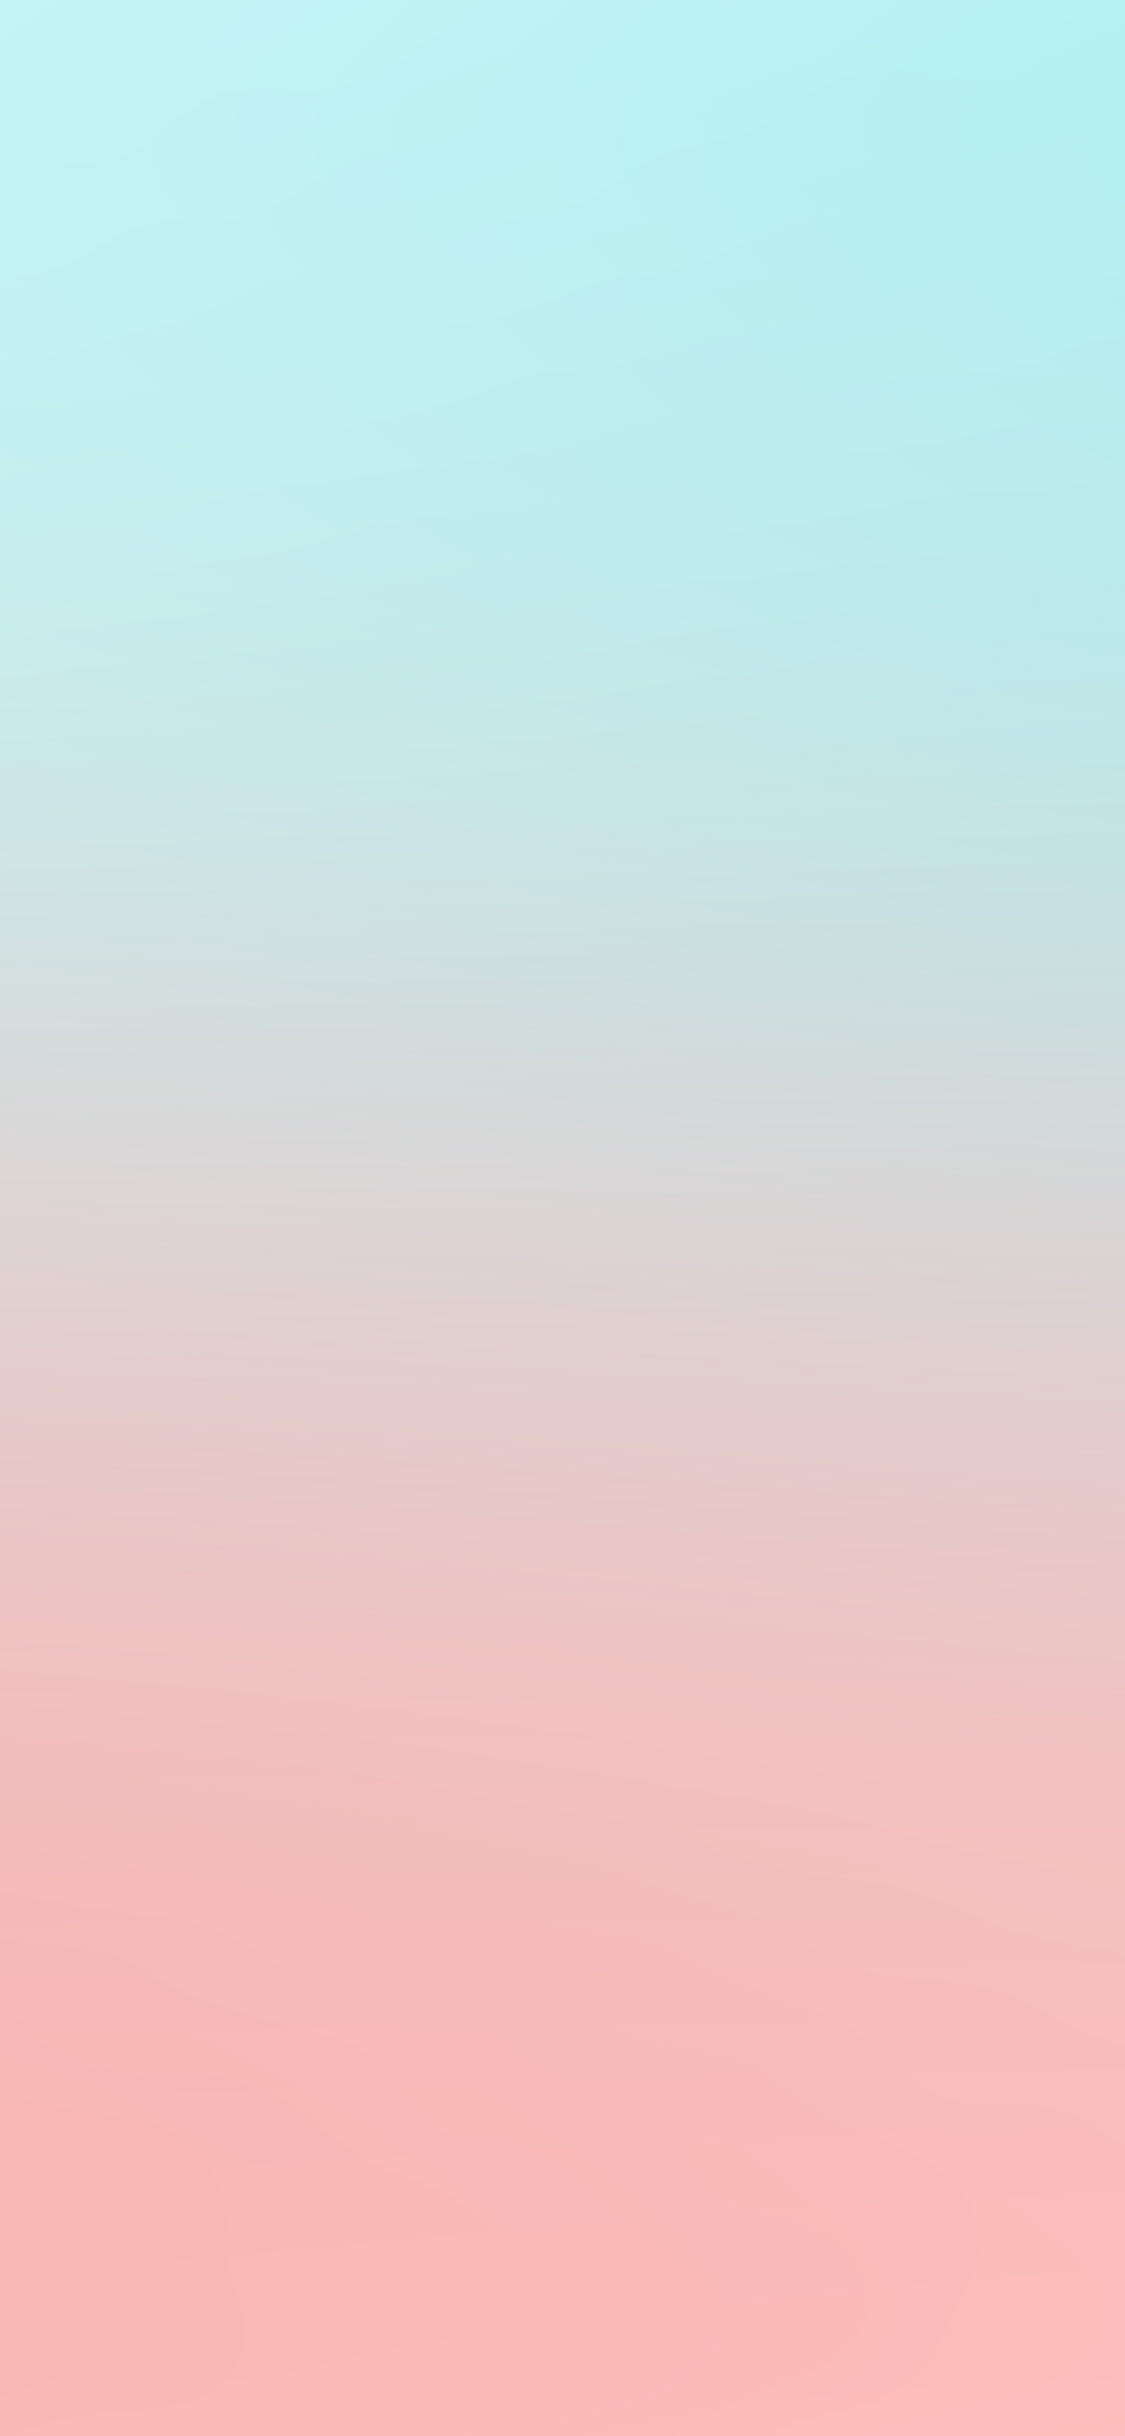 Pastel Red And Blue - HD Wallpaper 